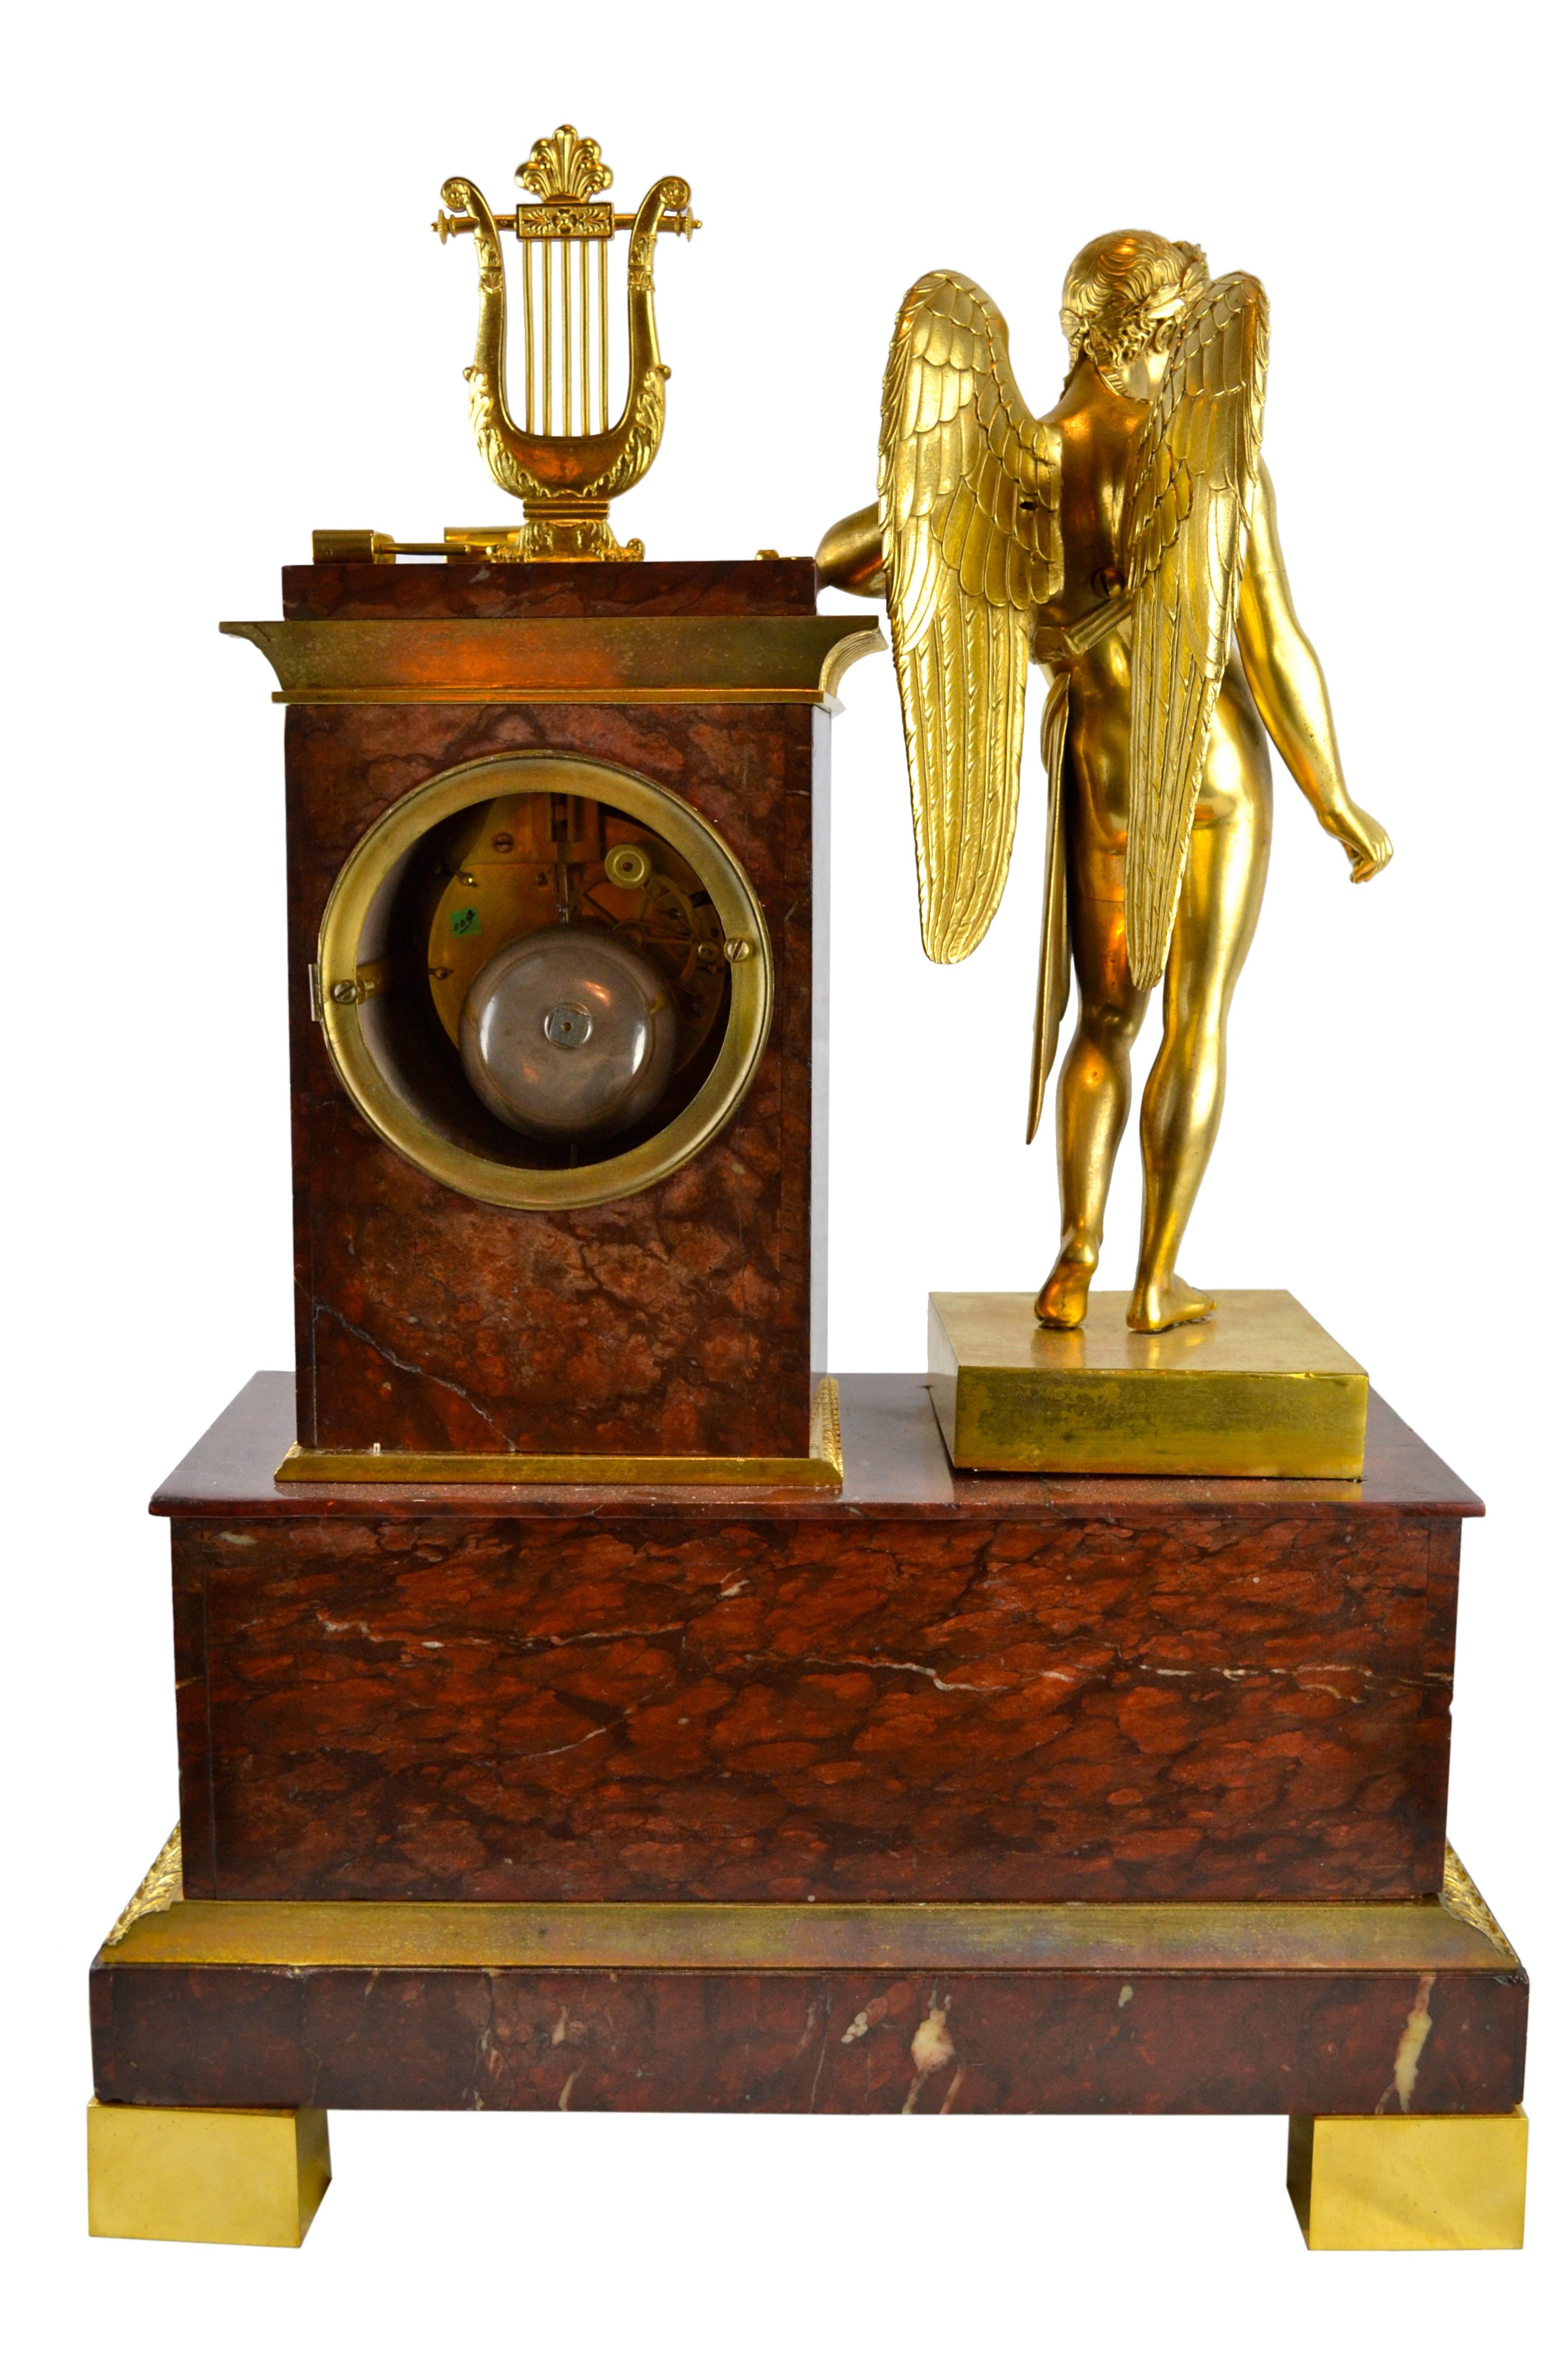 19th Century French Empire Clock Depicting Apollo God of Music and the Arts  For Sale